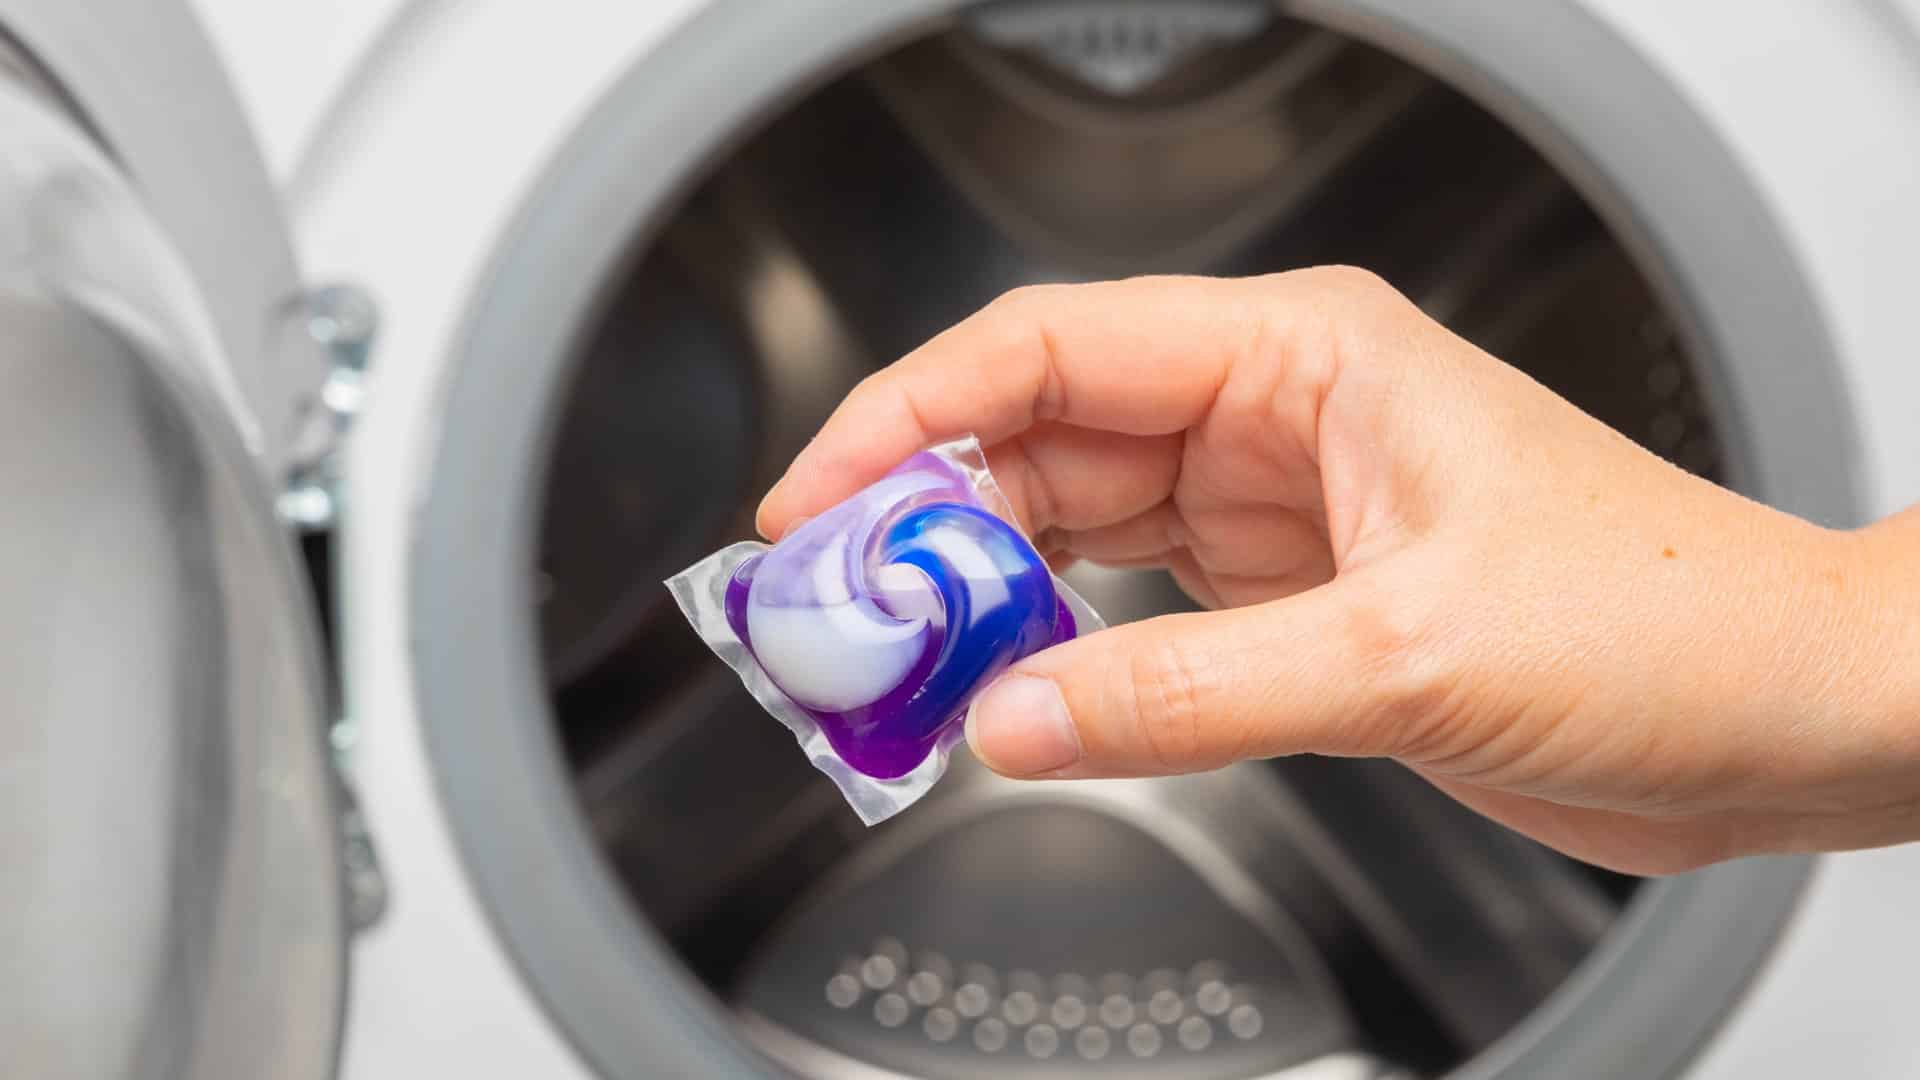 Featured image for “Laundry Pods Not Dissolving? Here’s What to Do”